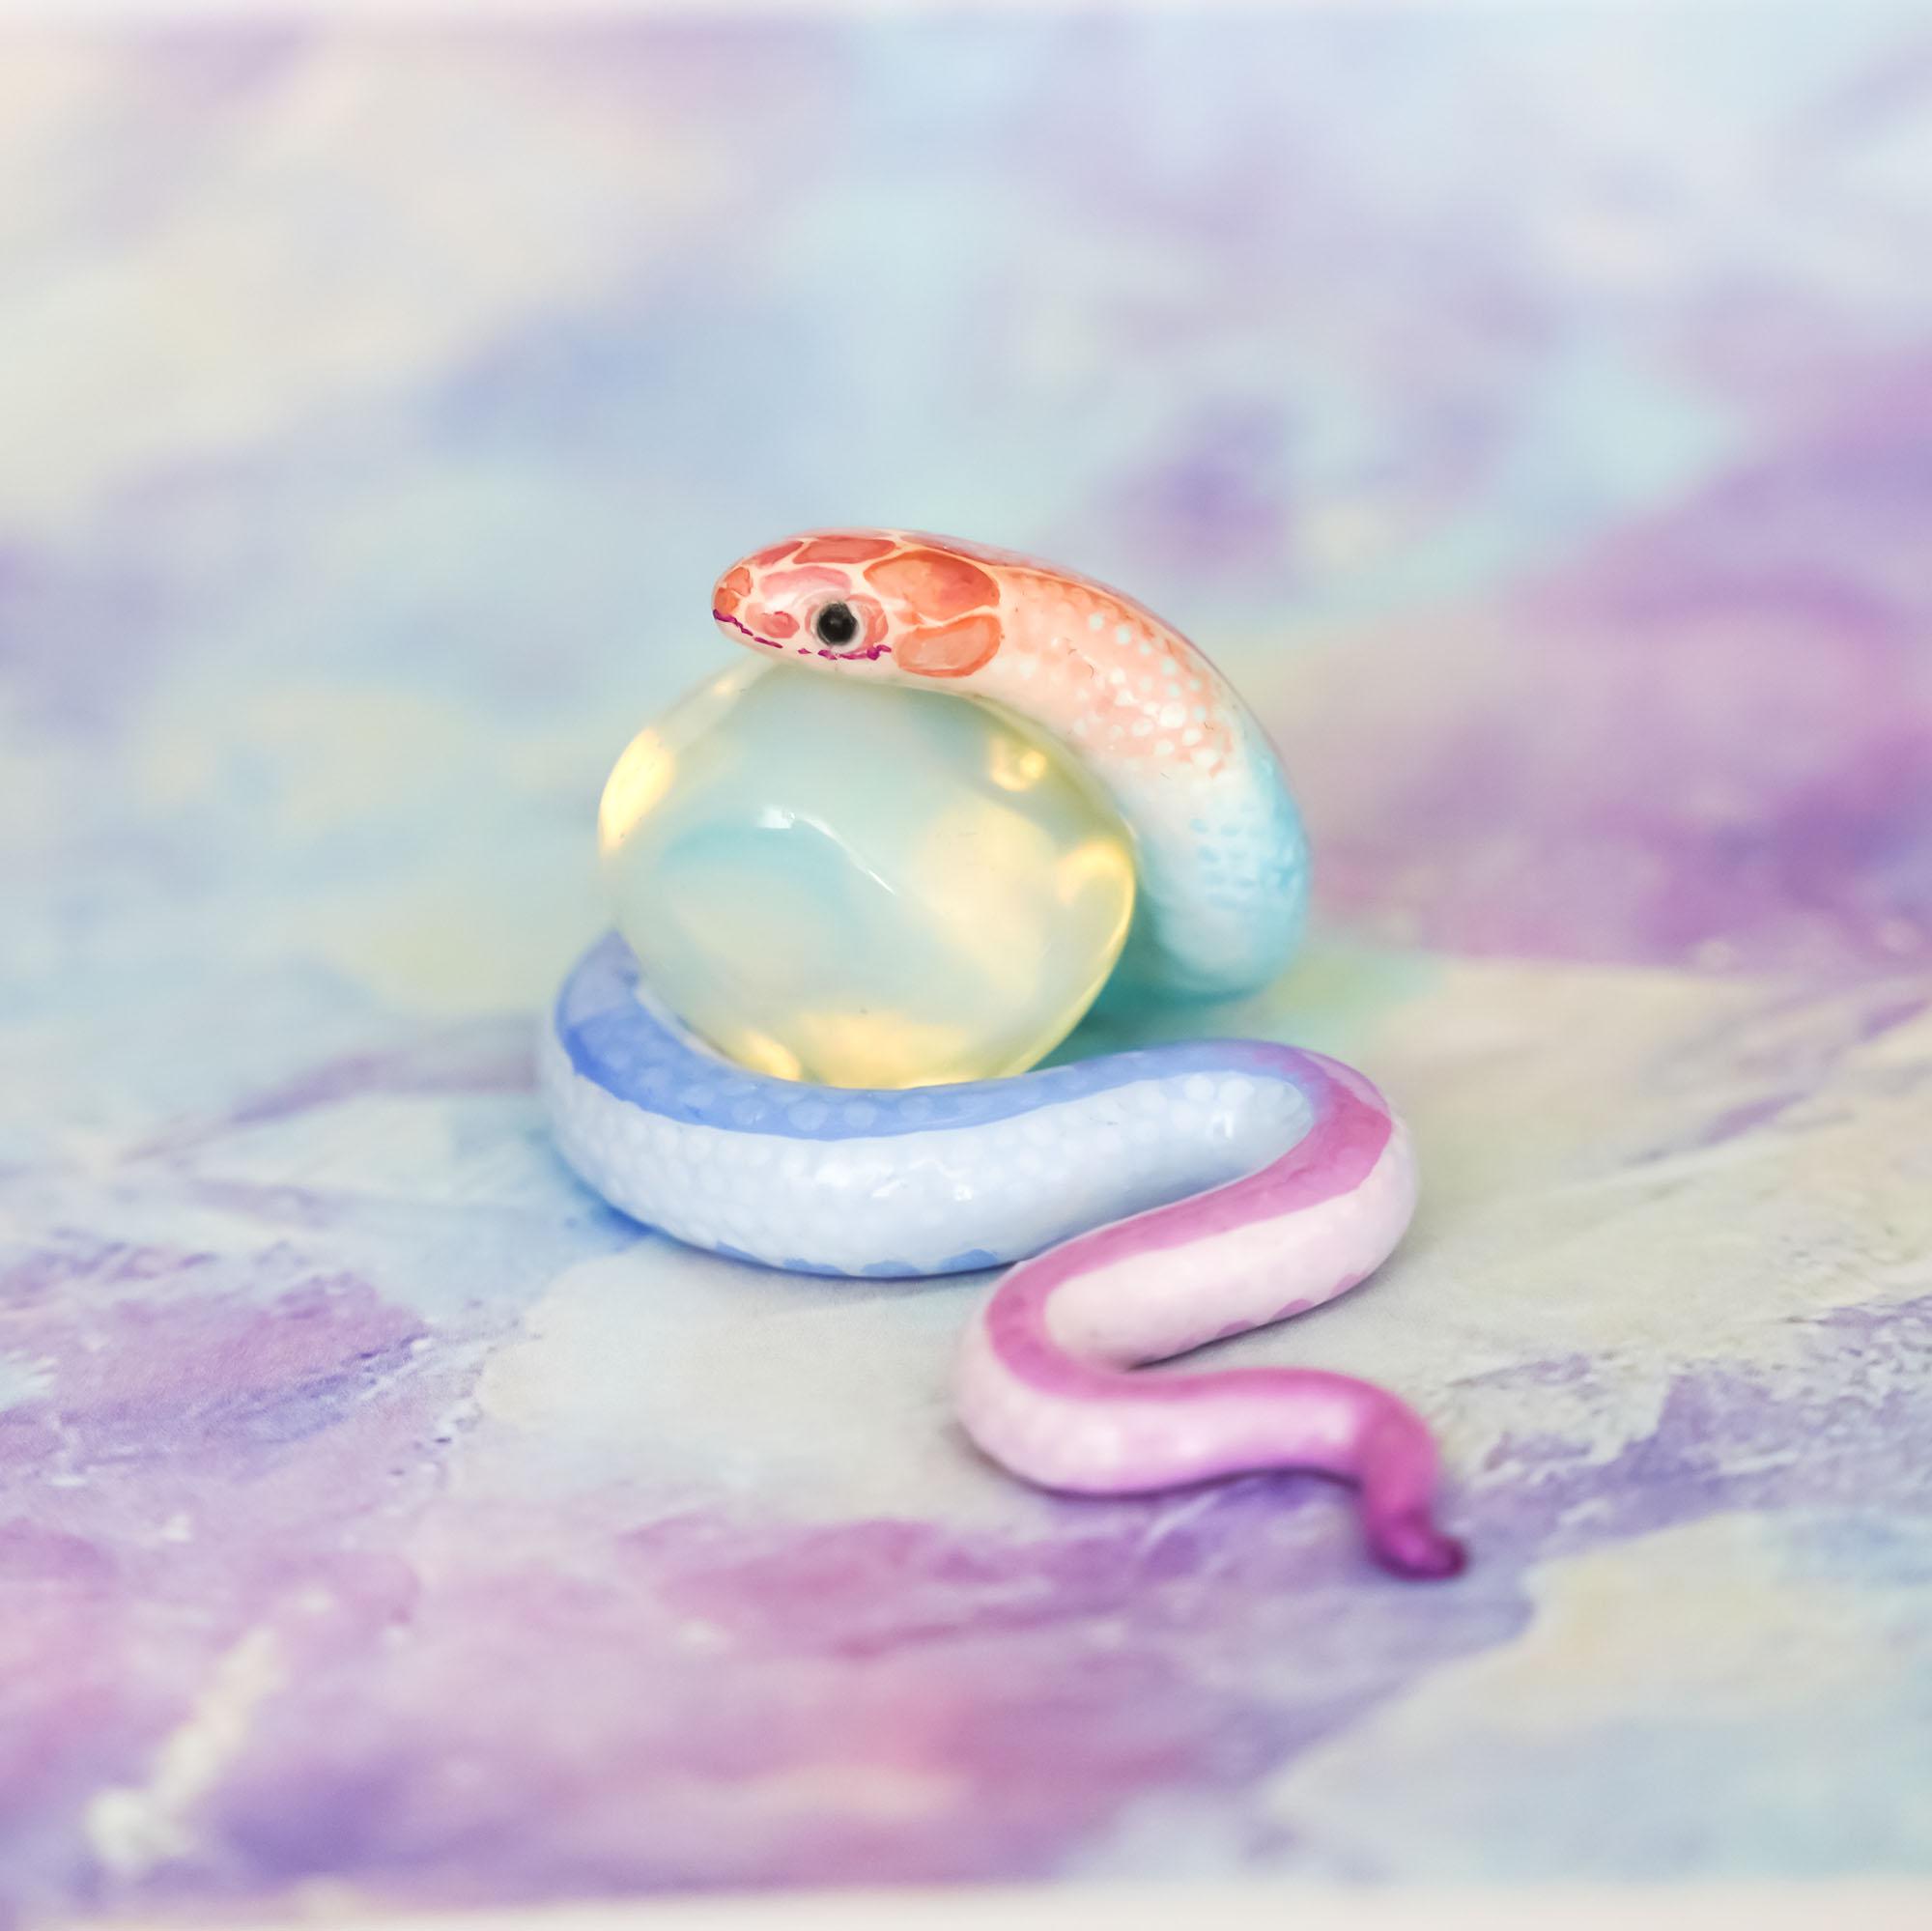 A pink and blue snake toy with a ball in its mouth - Snake